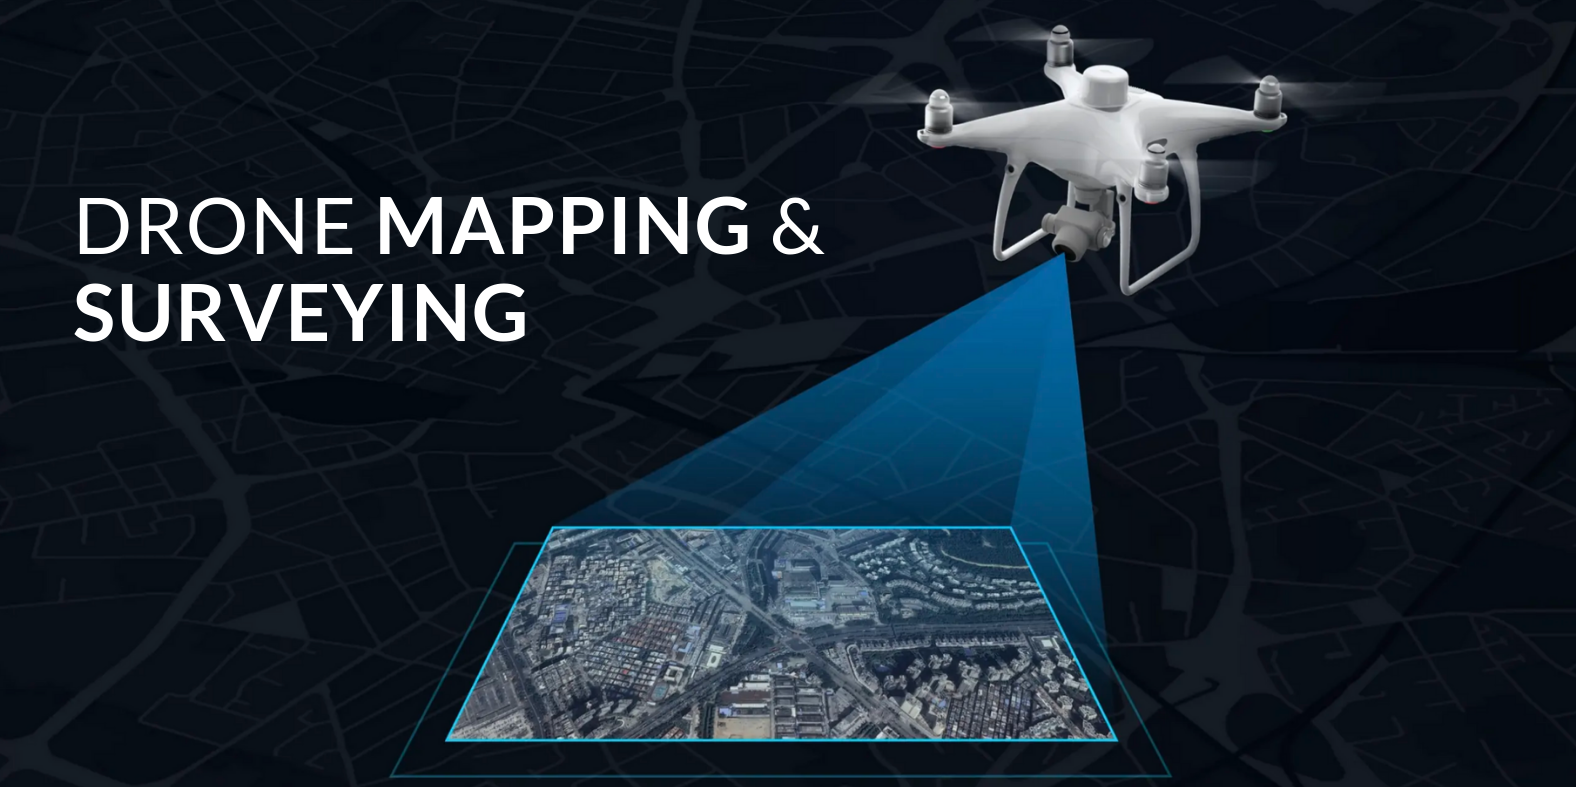 Drone Solutions for Mapping and Surveying